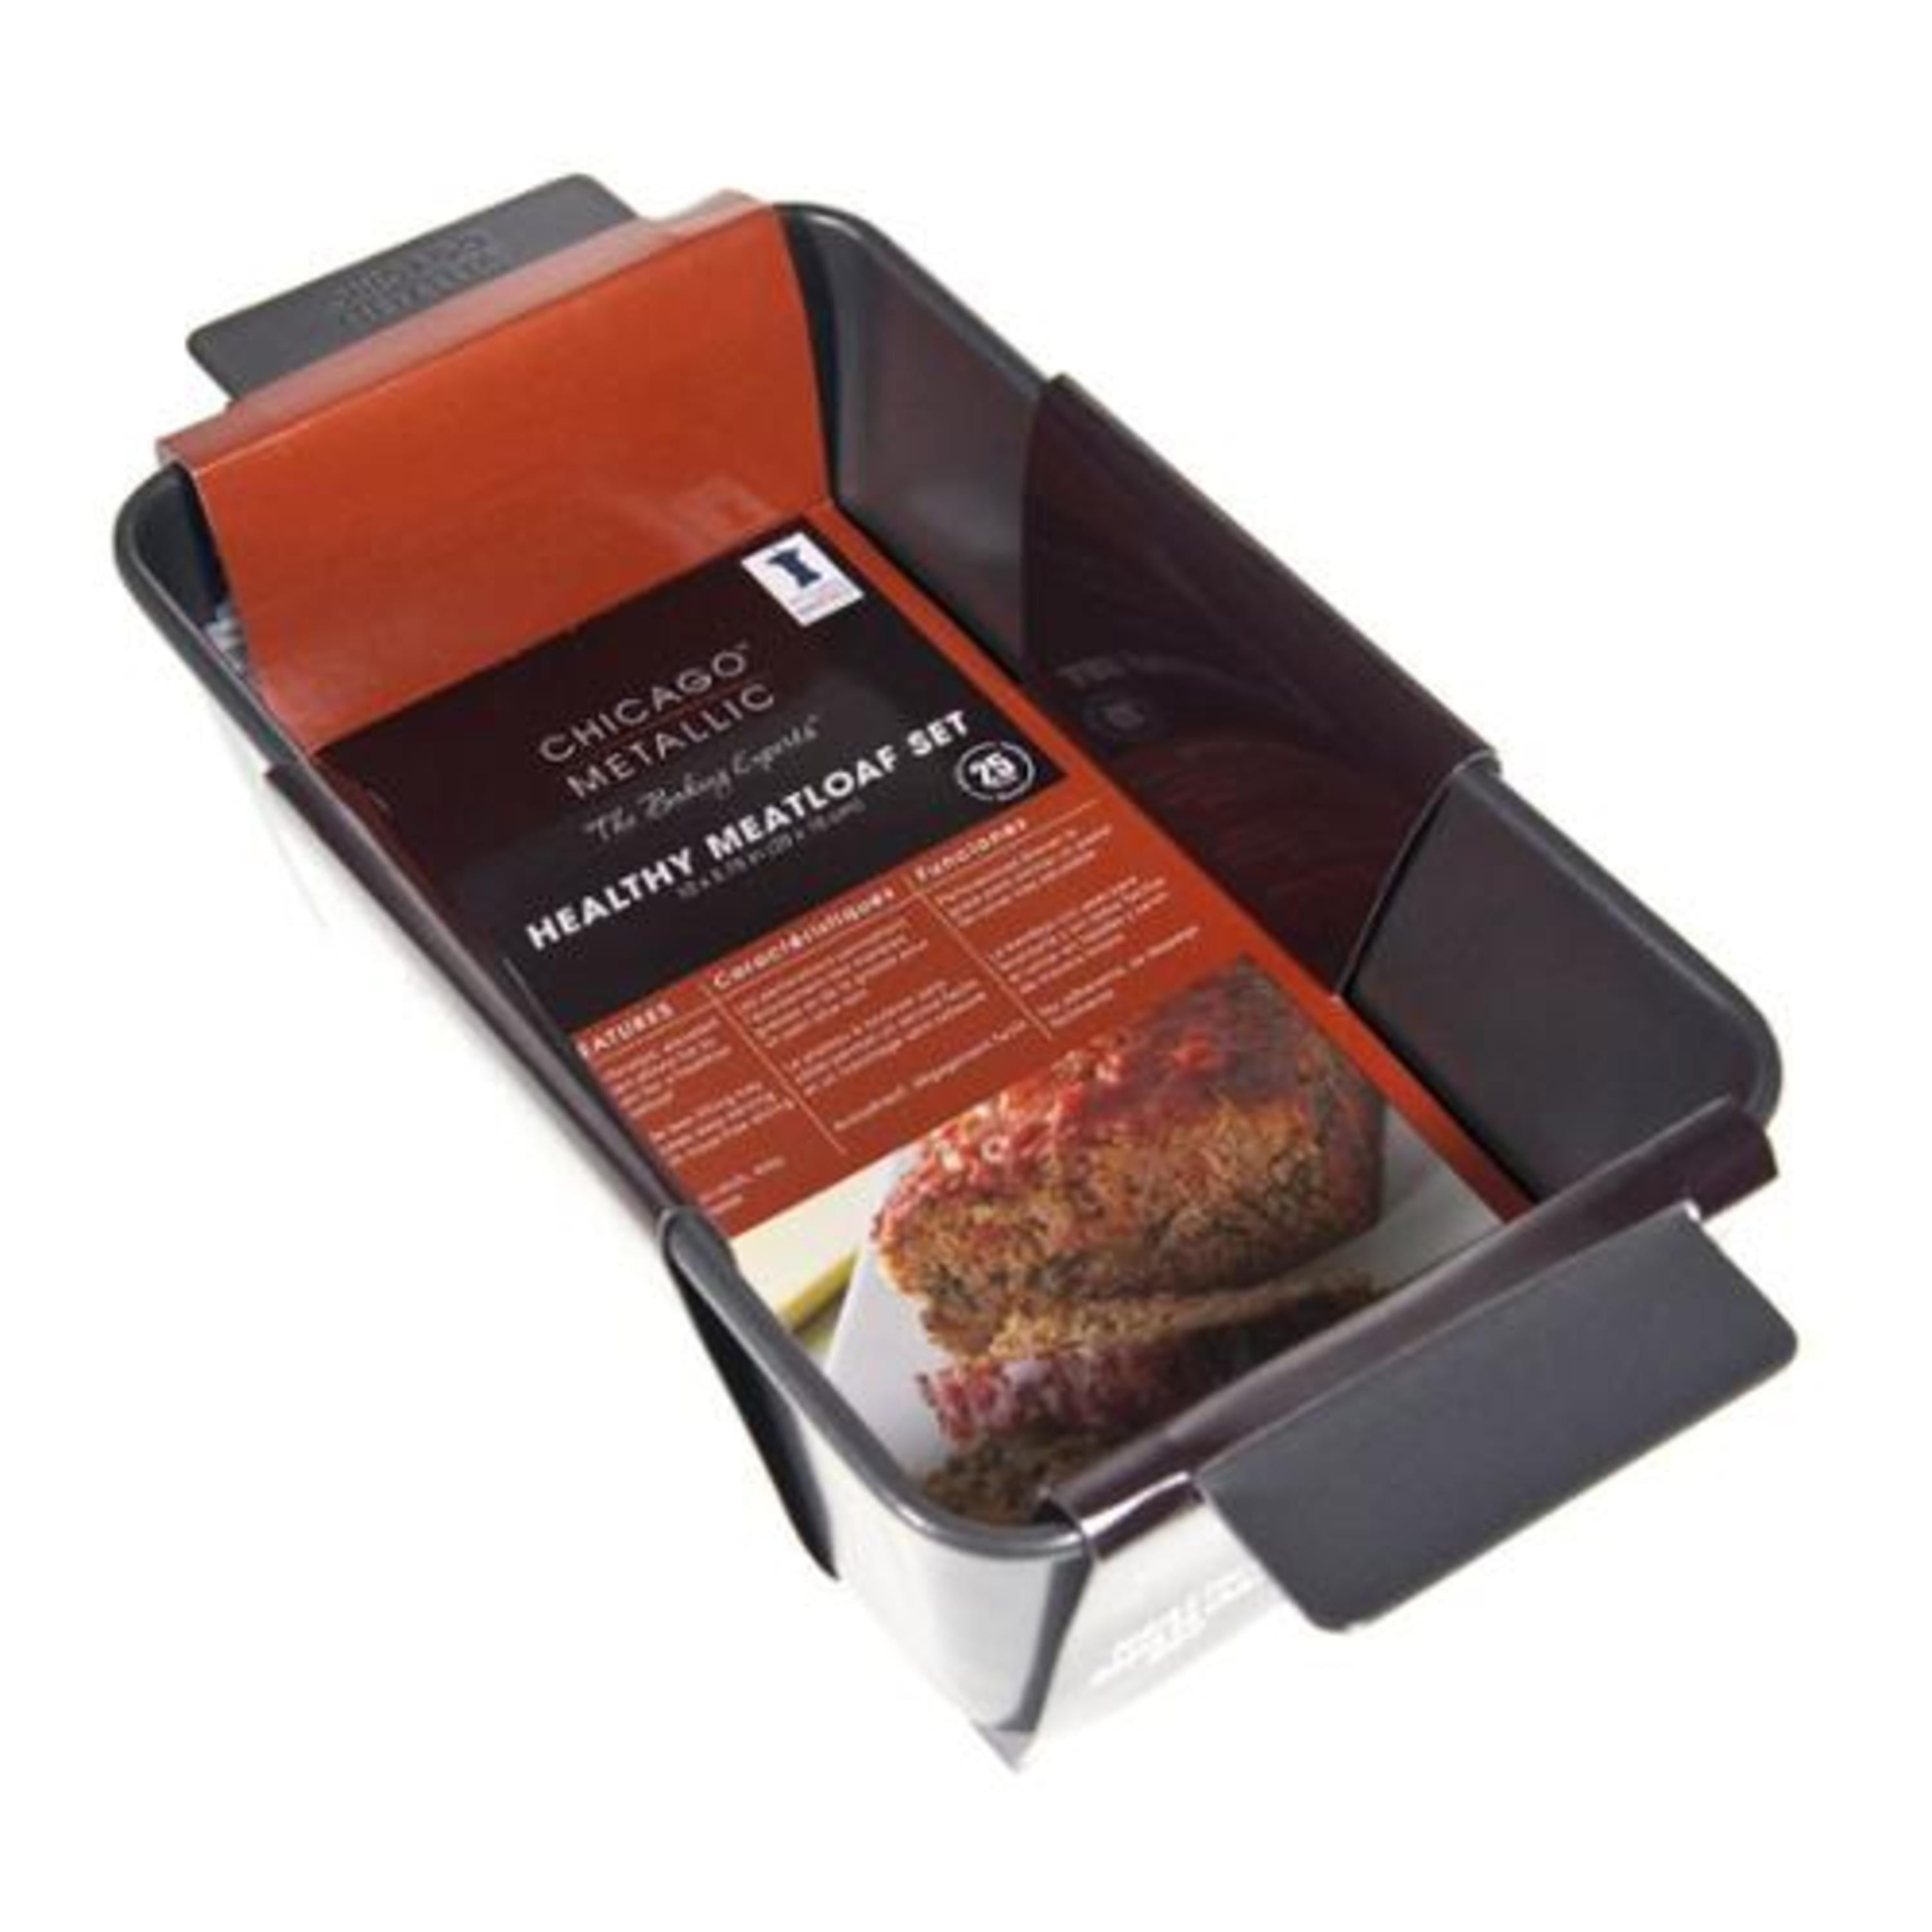 Details about   Chicago Metallic Professional Non-Stick 2-Piece Healthy Meatloaf Set 12.25-Inc 